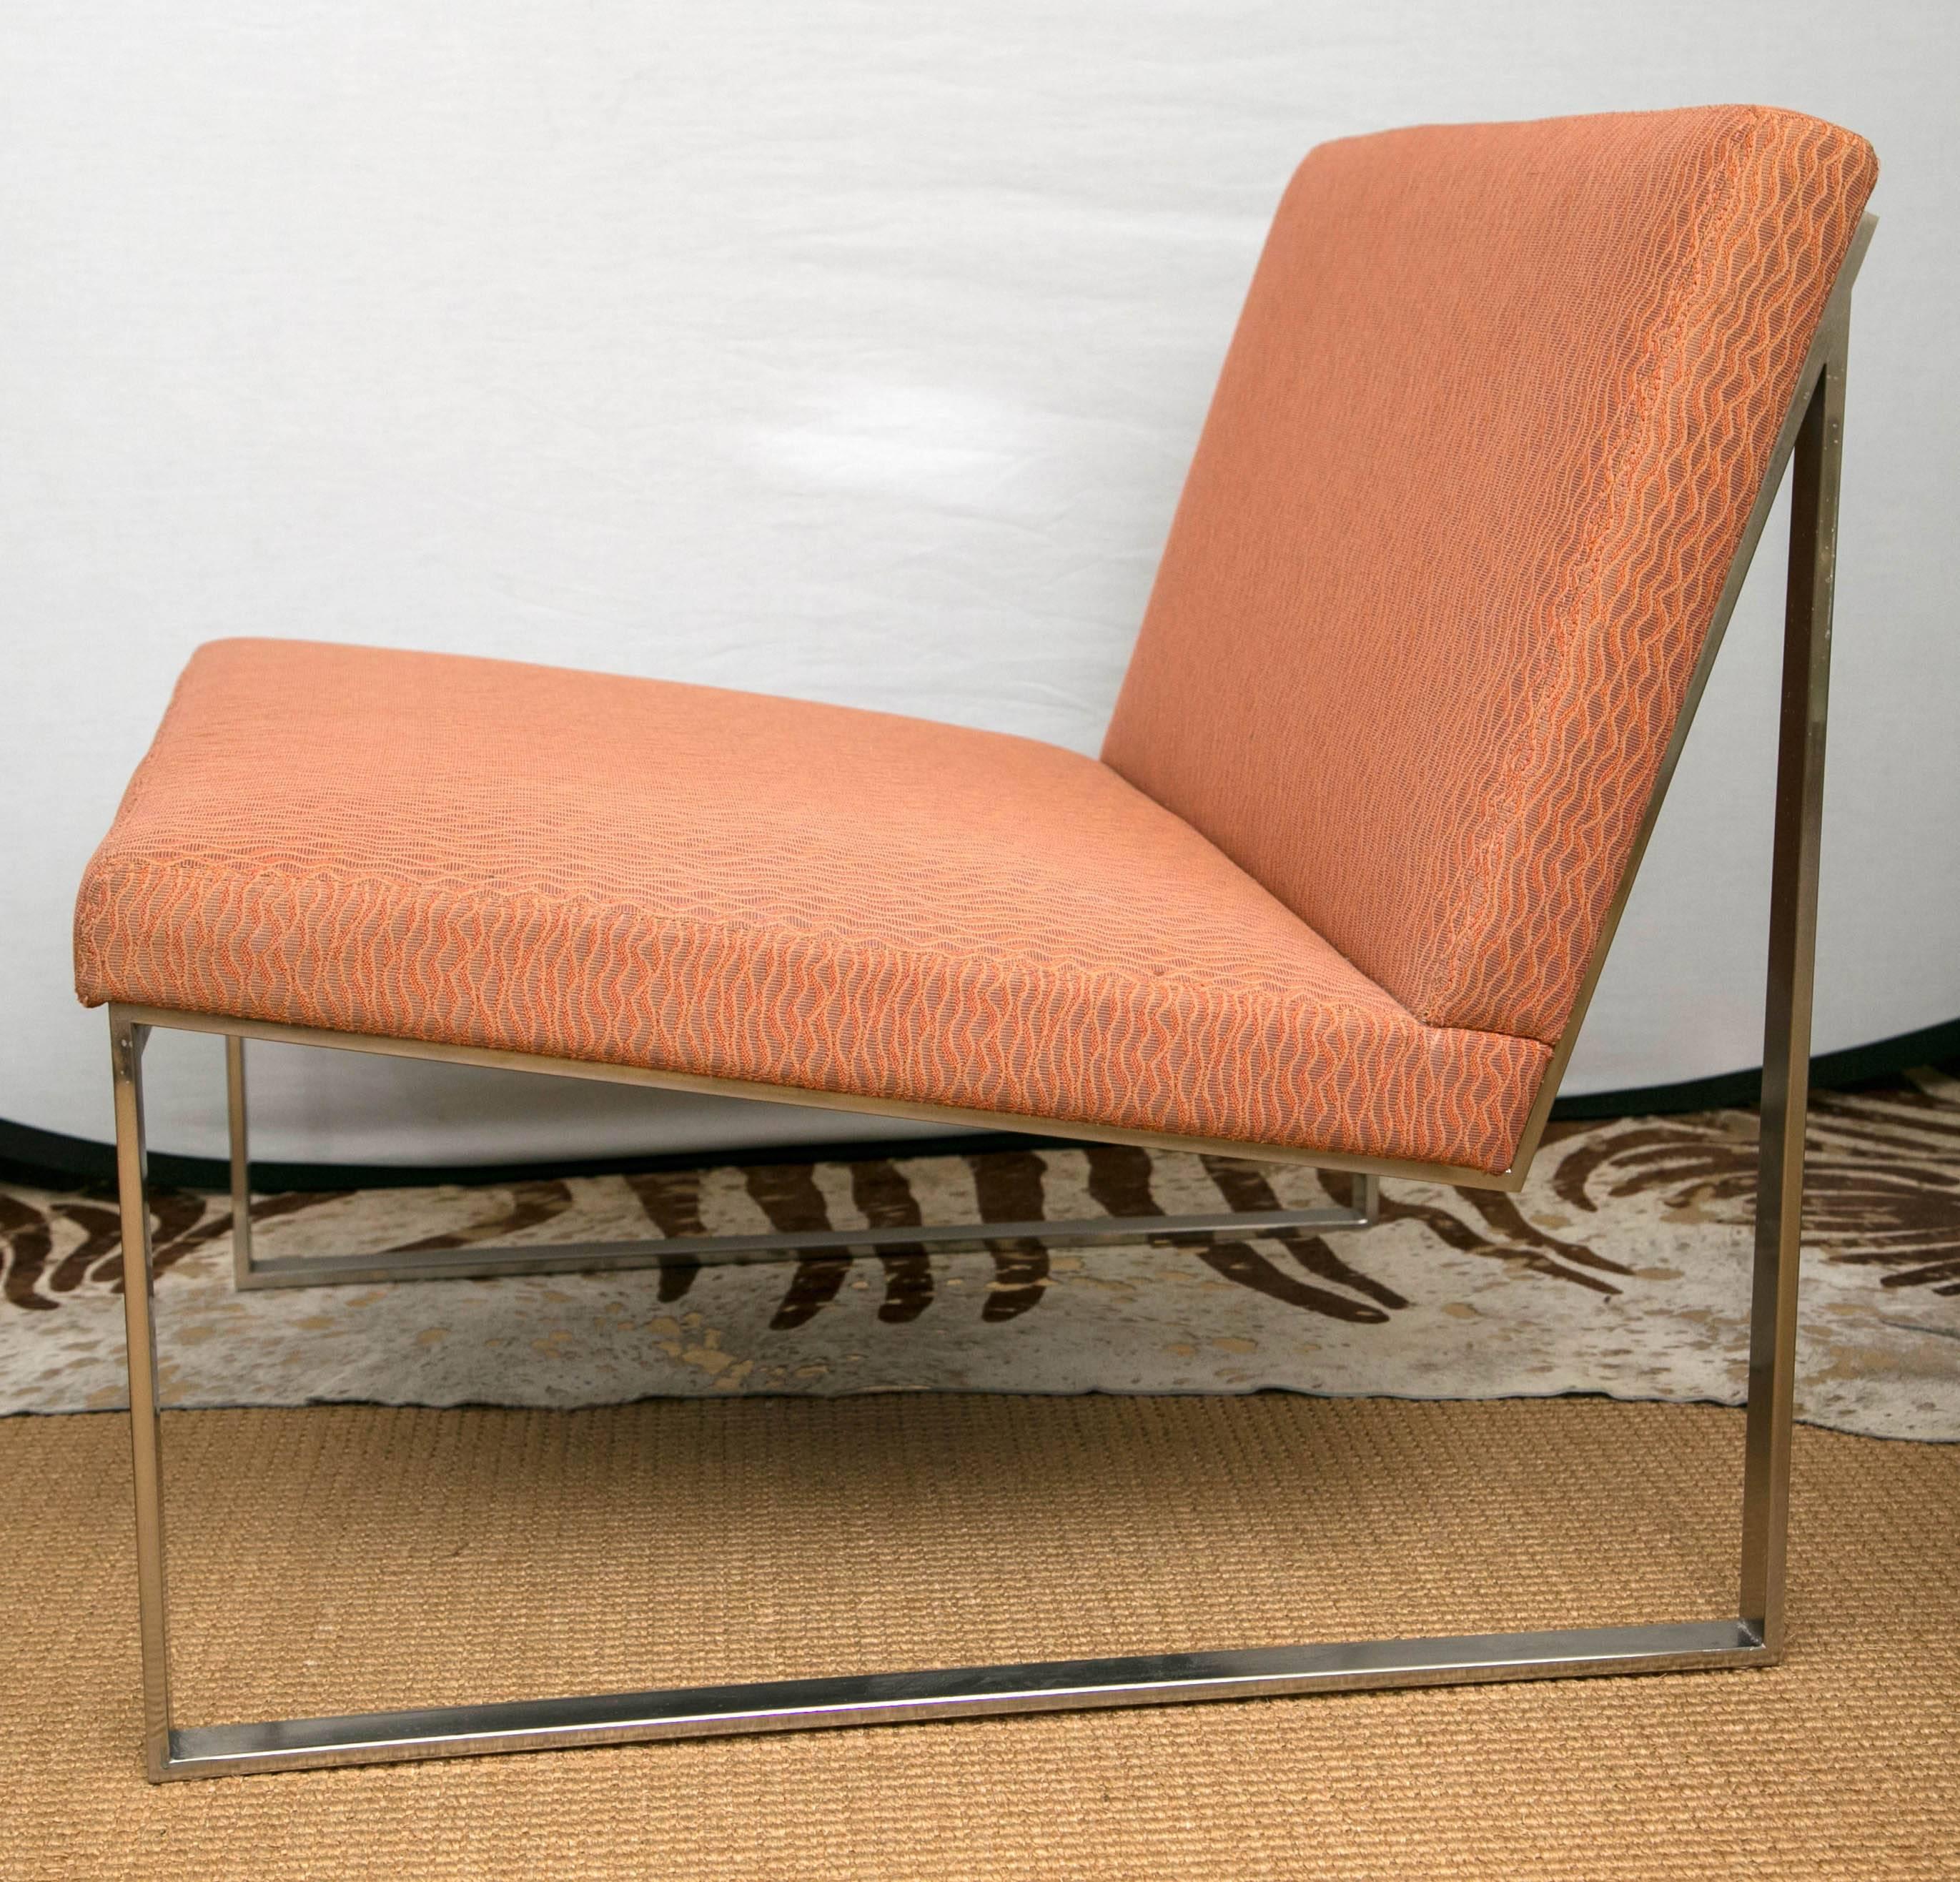 A pair of lounge chairs designed by Fabien Baron for Bernhardt design. The chairs are a brushed nickel open frame design. Currently upholstered with a custom light orange fabric.